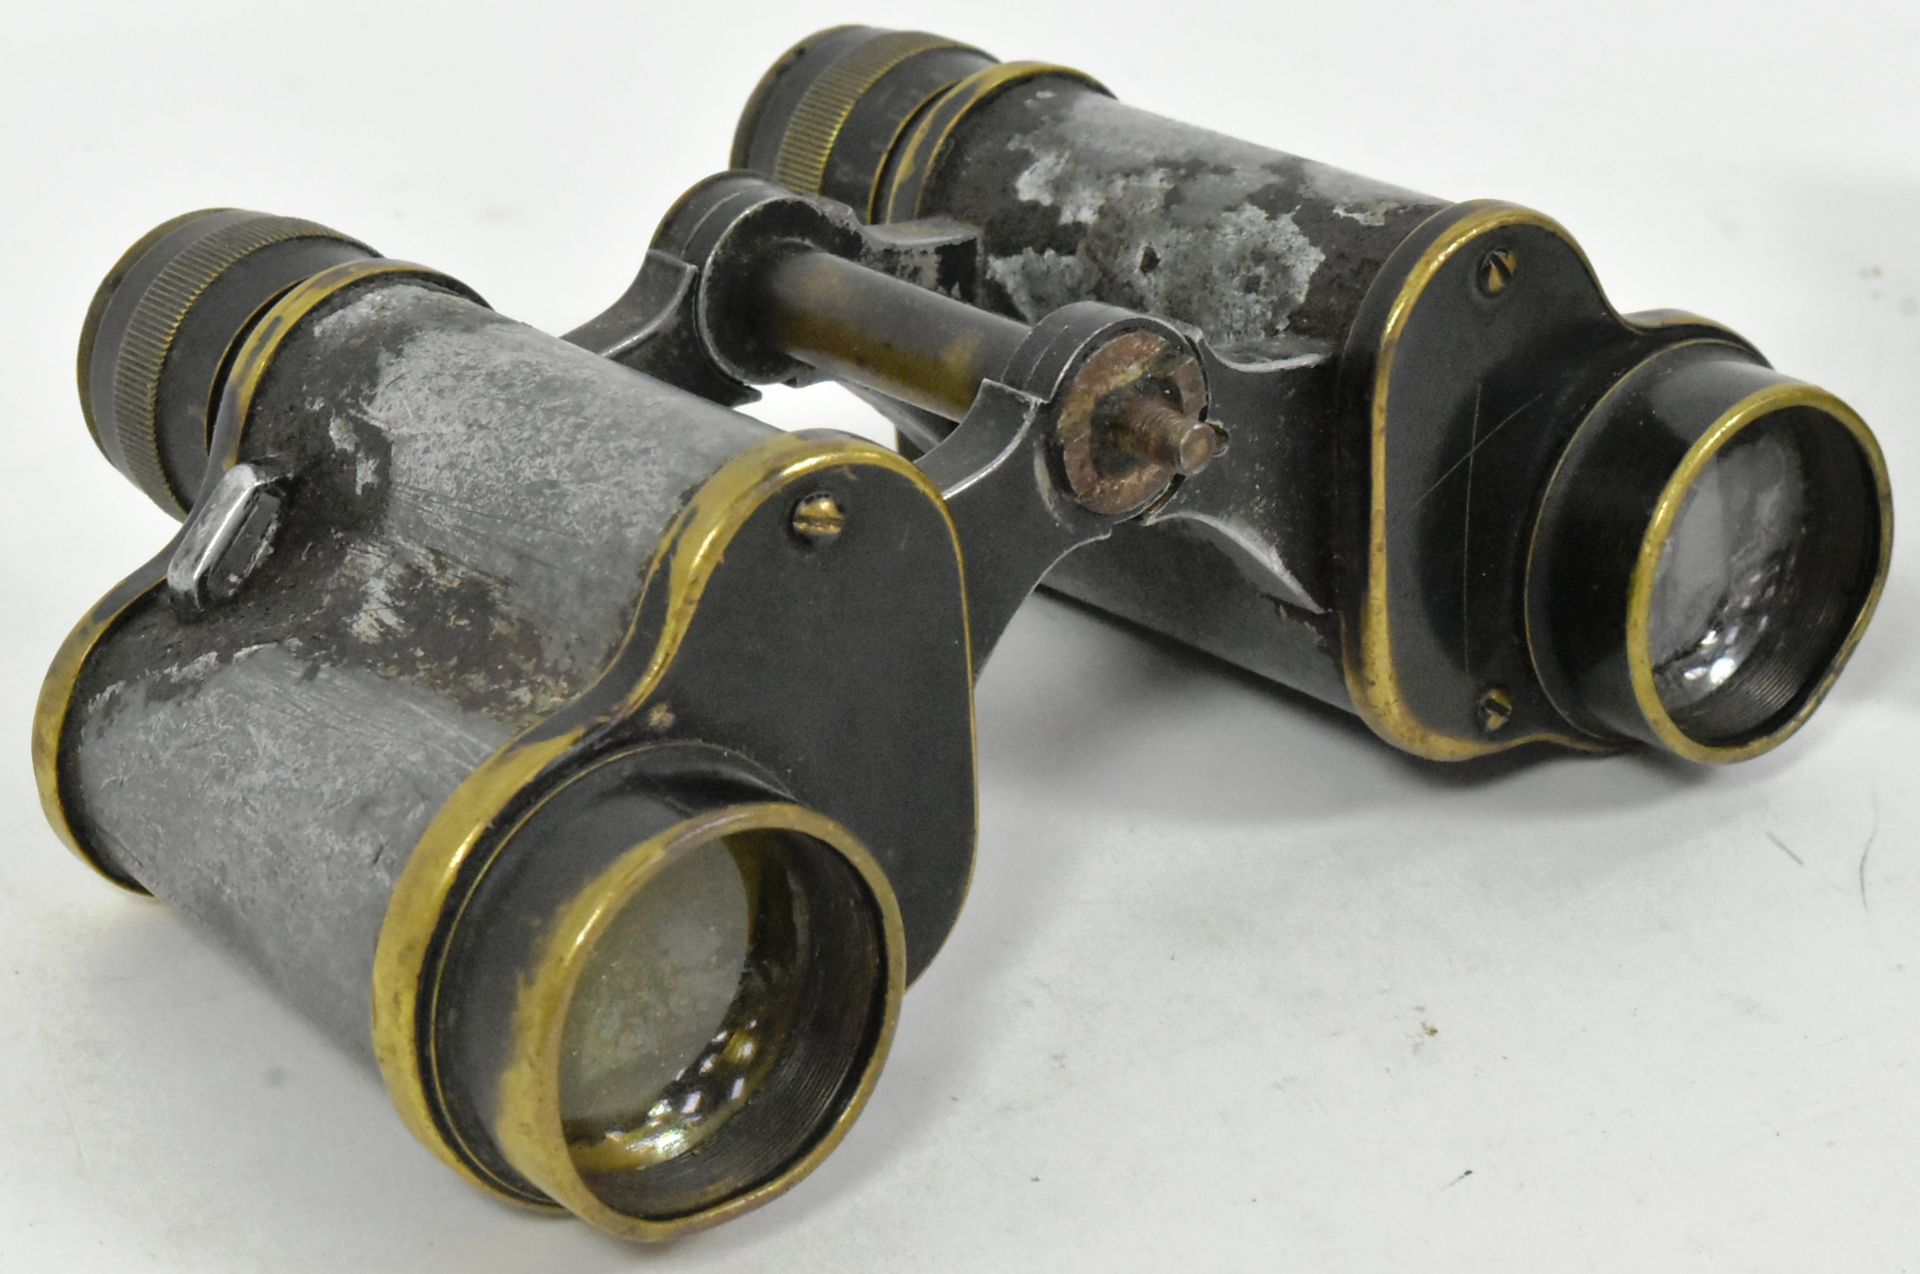 TWO PAIRS OF EARLY 20TH CENTURY BINOCULARS - Image 3 of 6